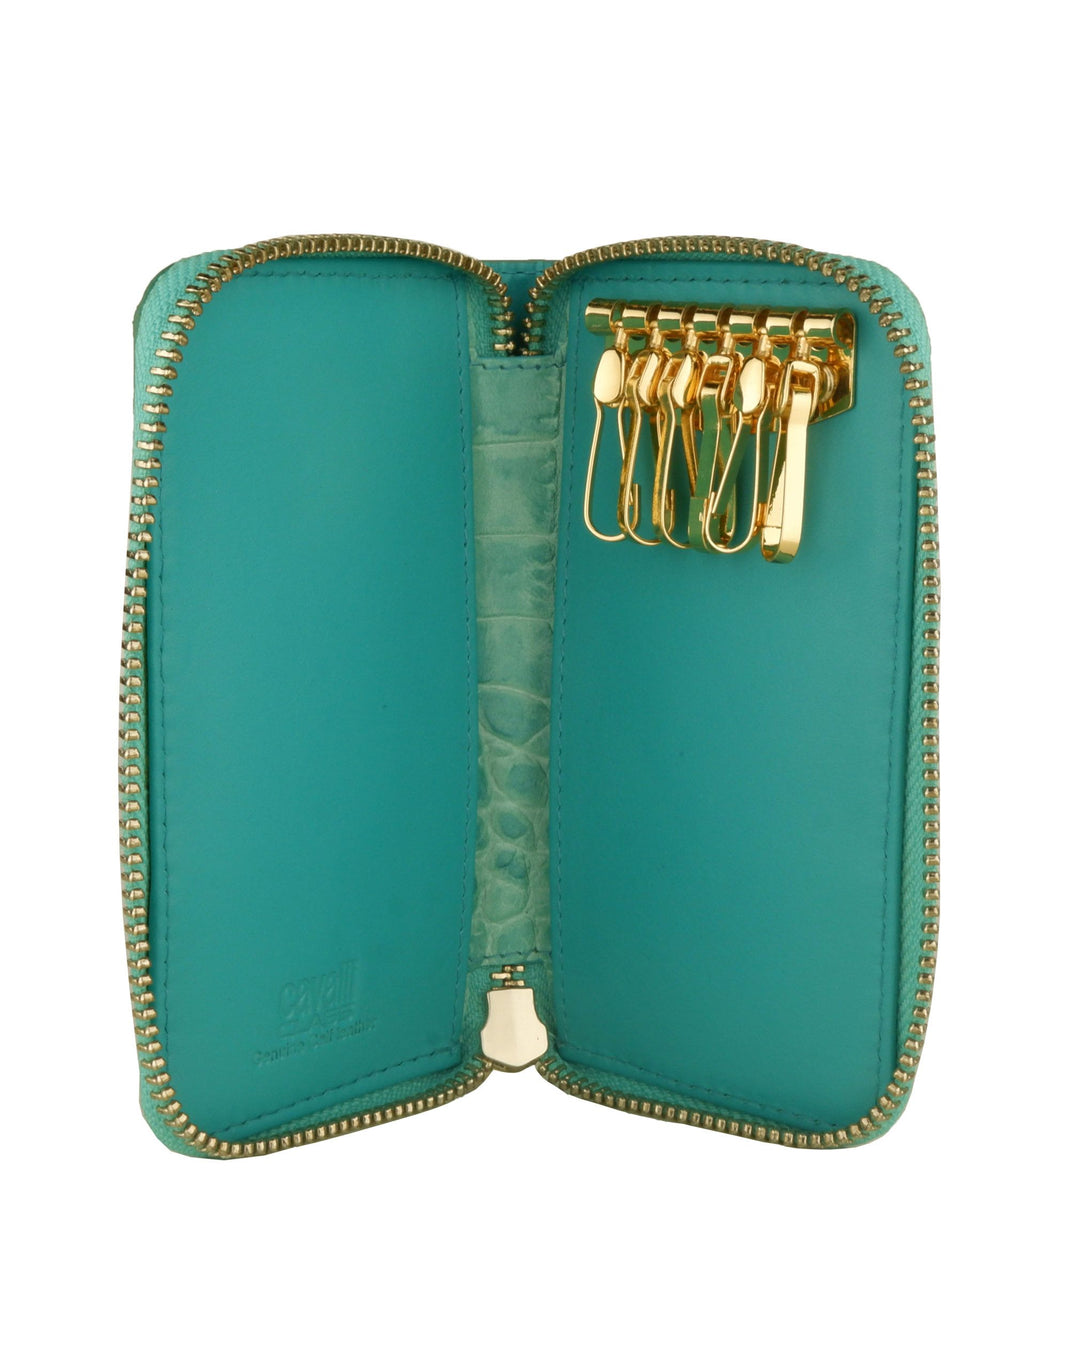 Cavalli Class Chic Turquoise Leather Keyholder